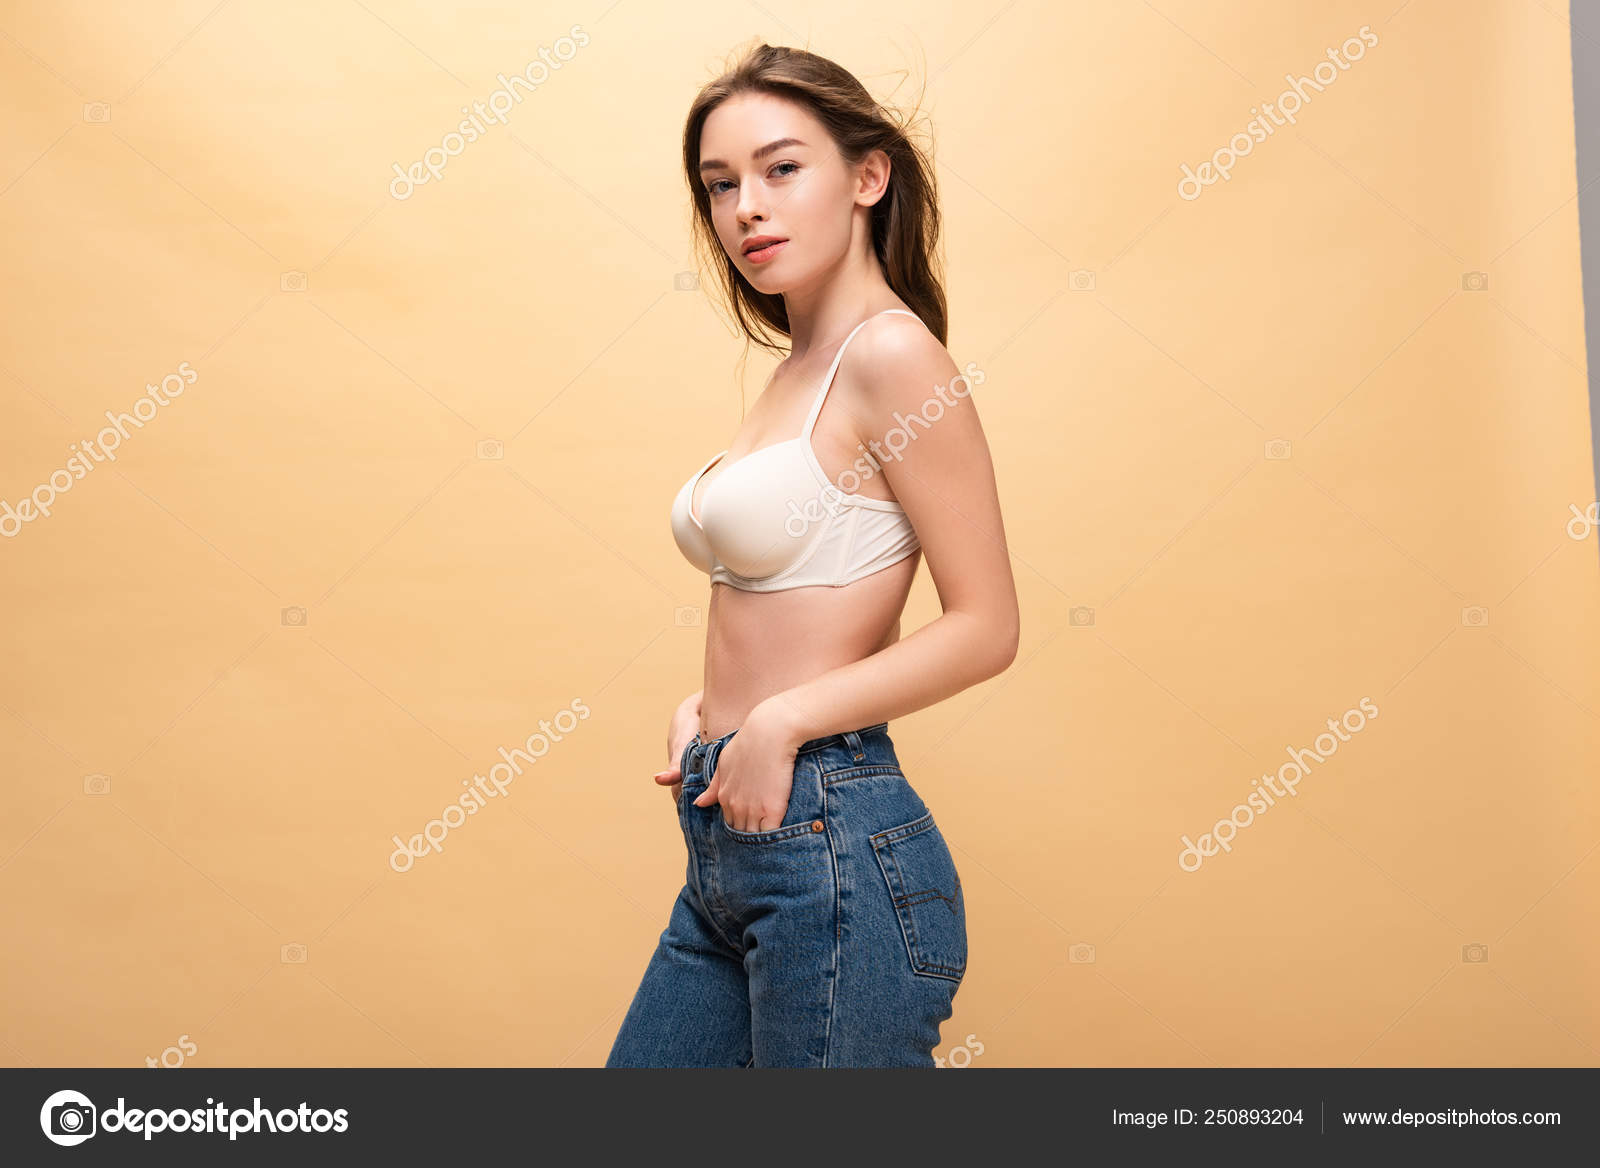 Pensive Girl Blue Jeans Bra Pockets Looking Isolated Stock Photo by 250893204